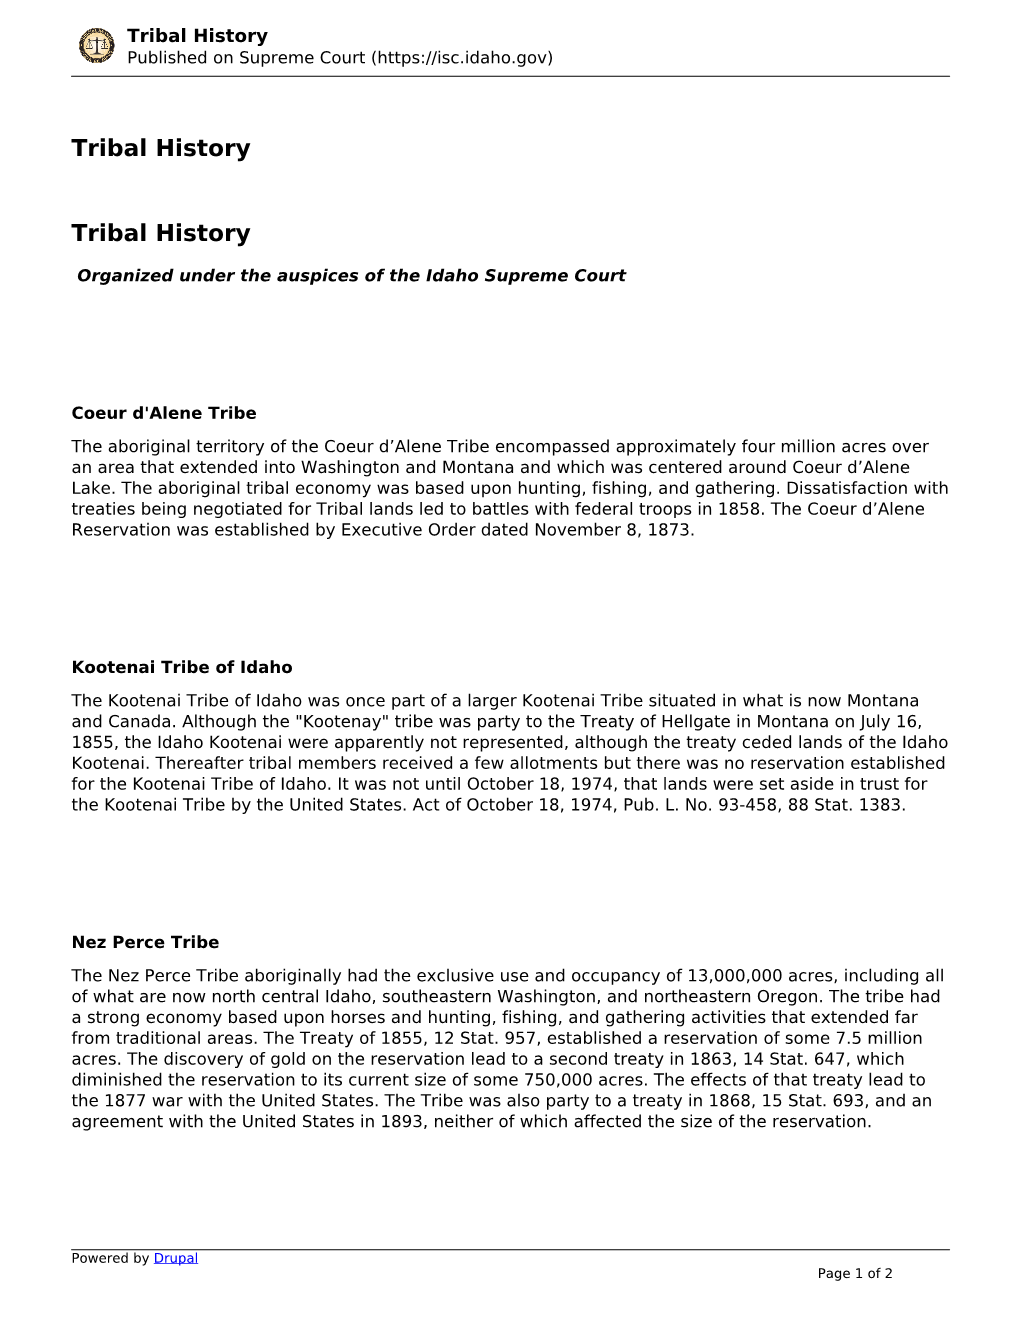 Tribal History Published on Supreme Court (